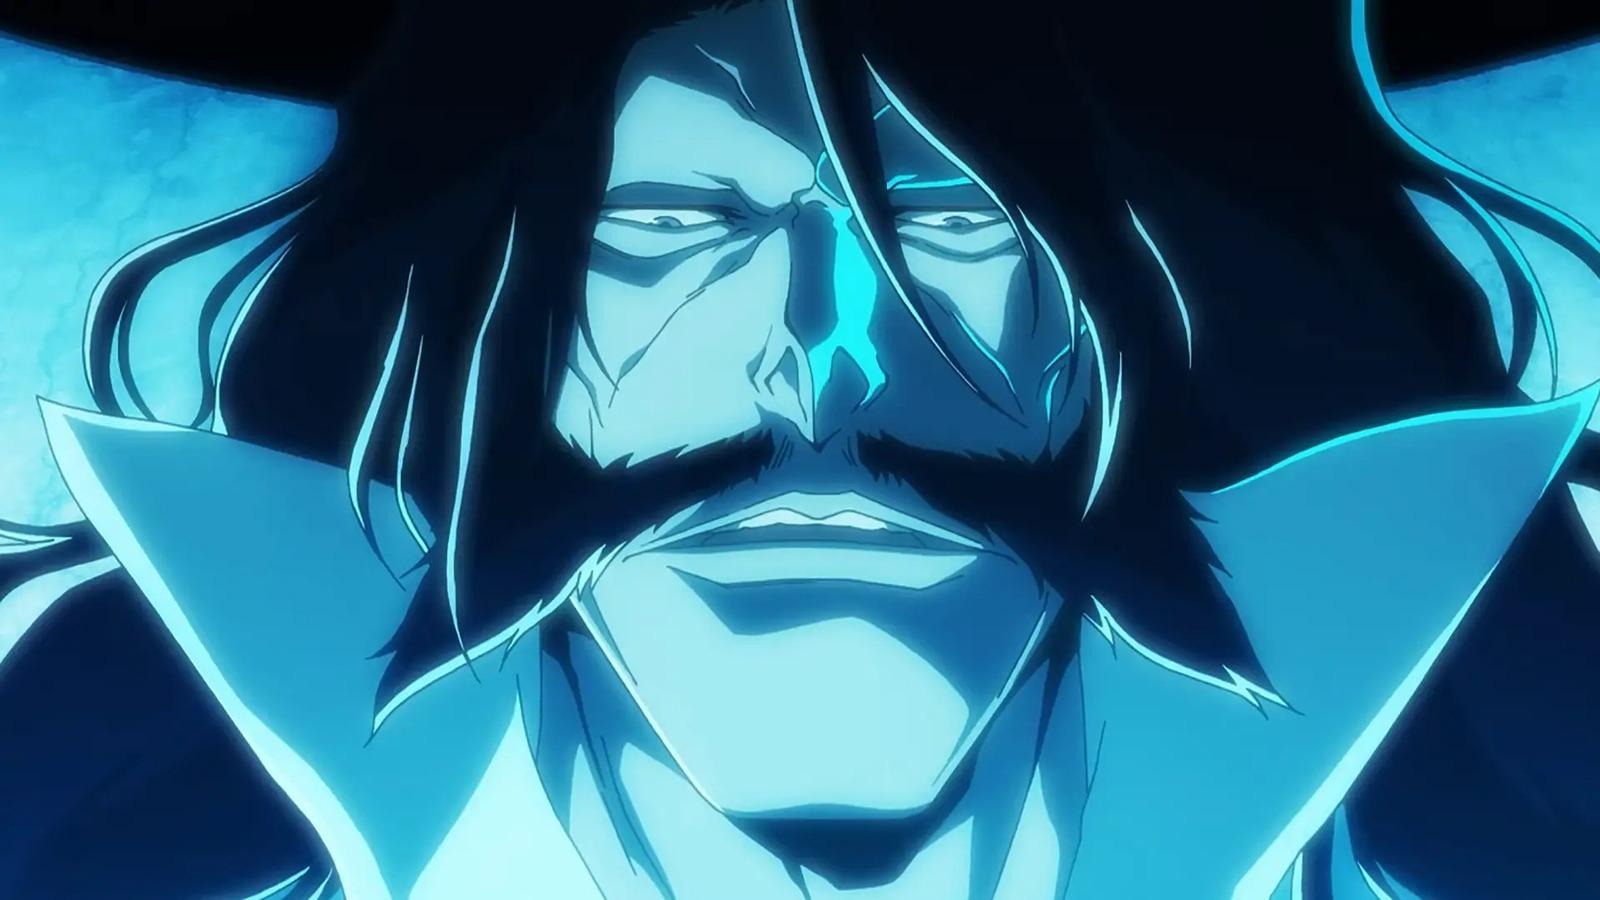 An image of Yhwach from Bleach